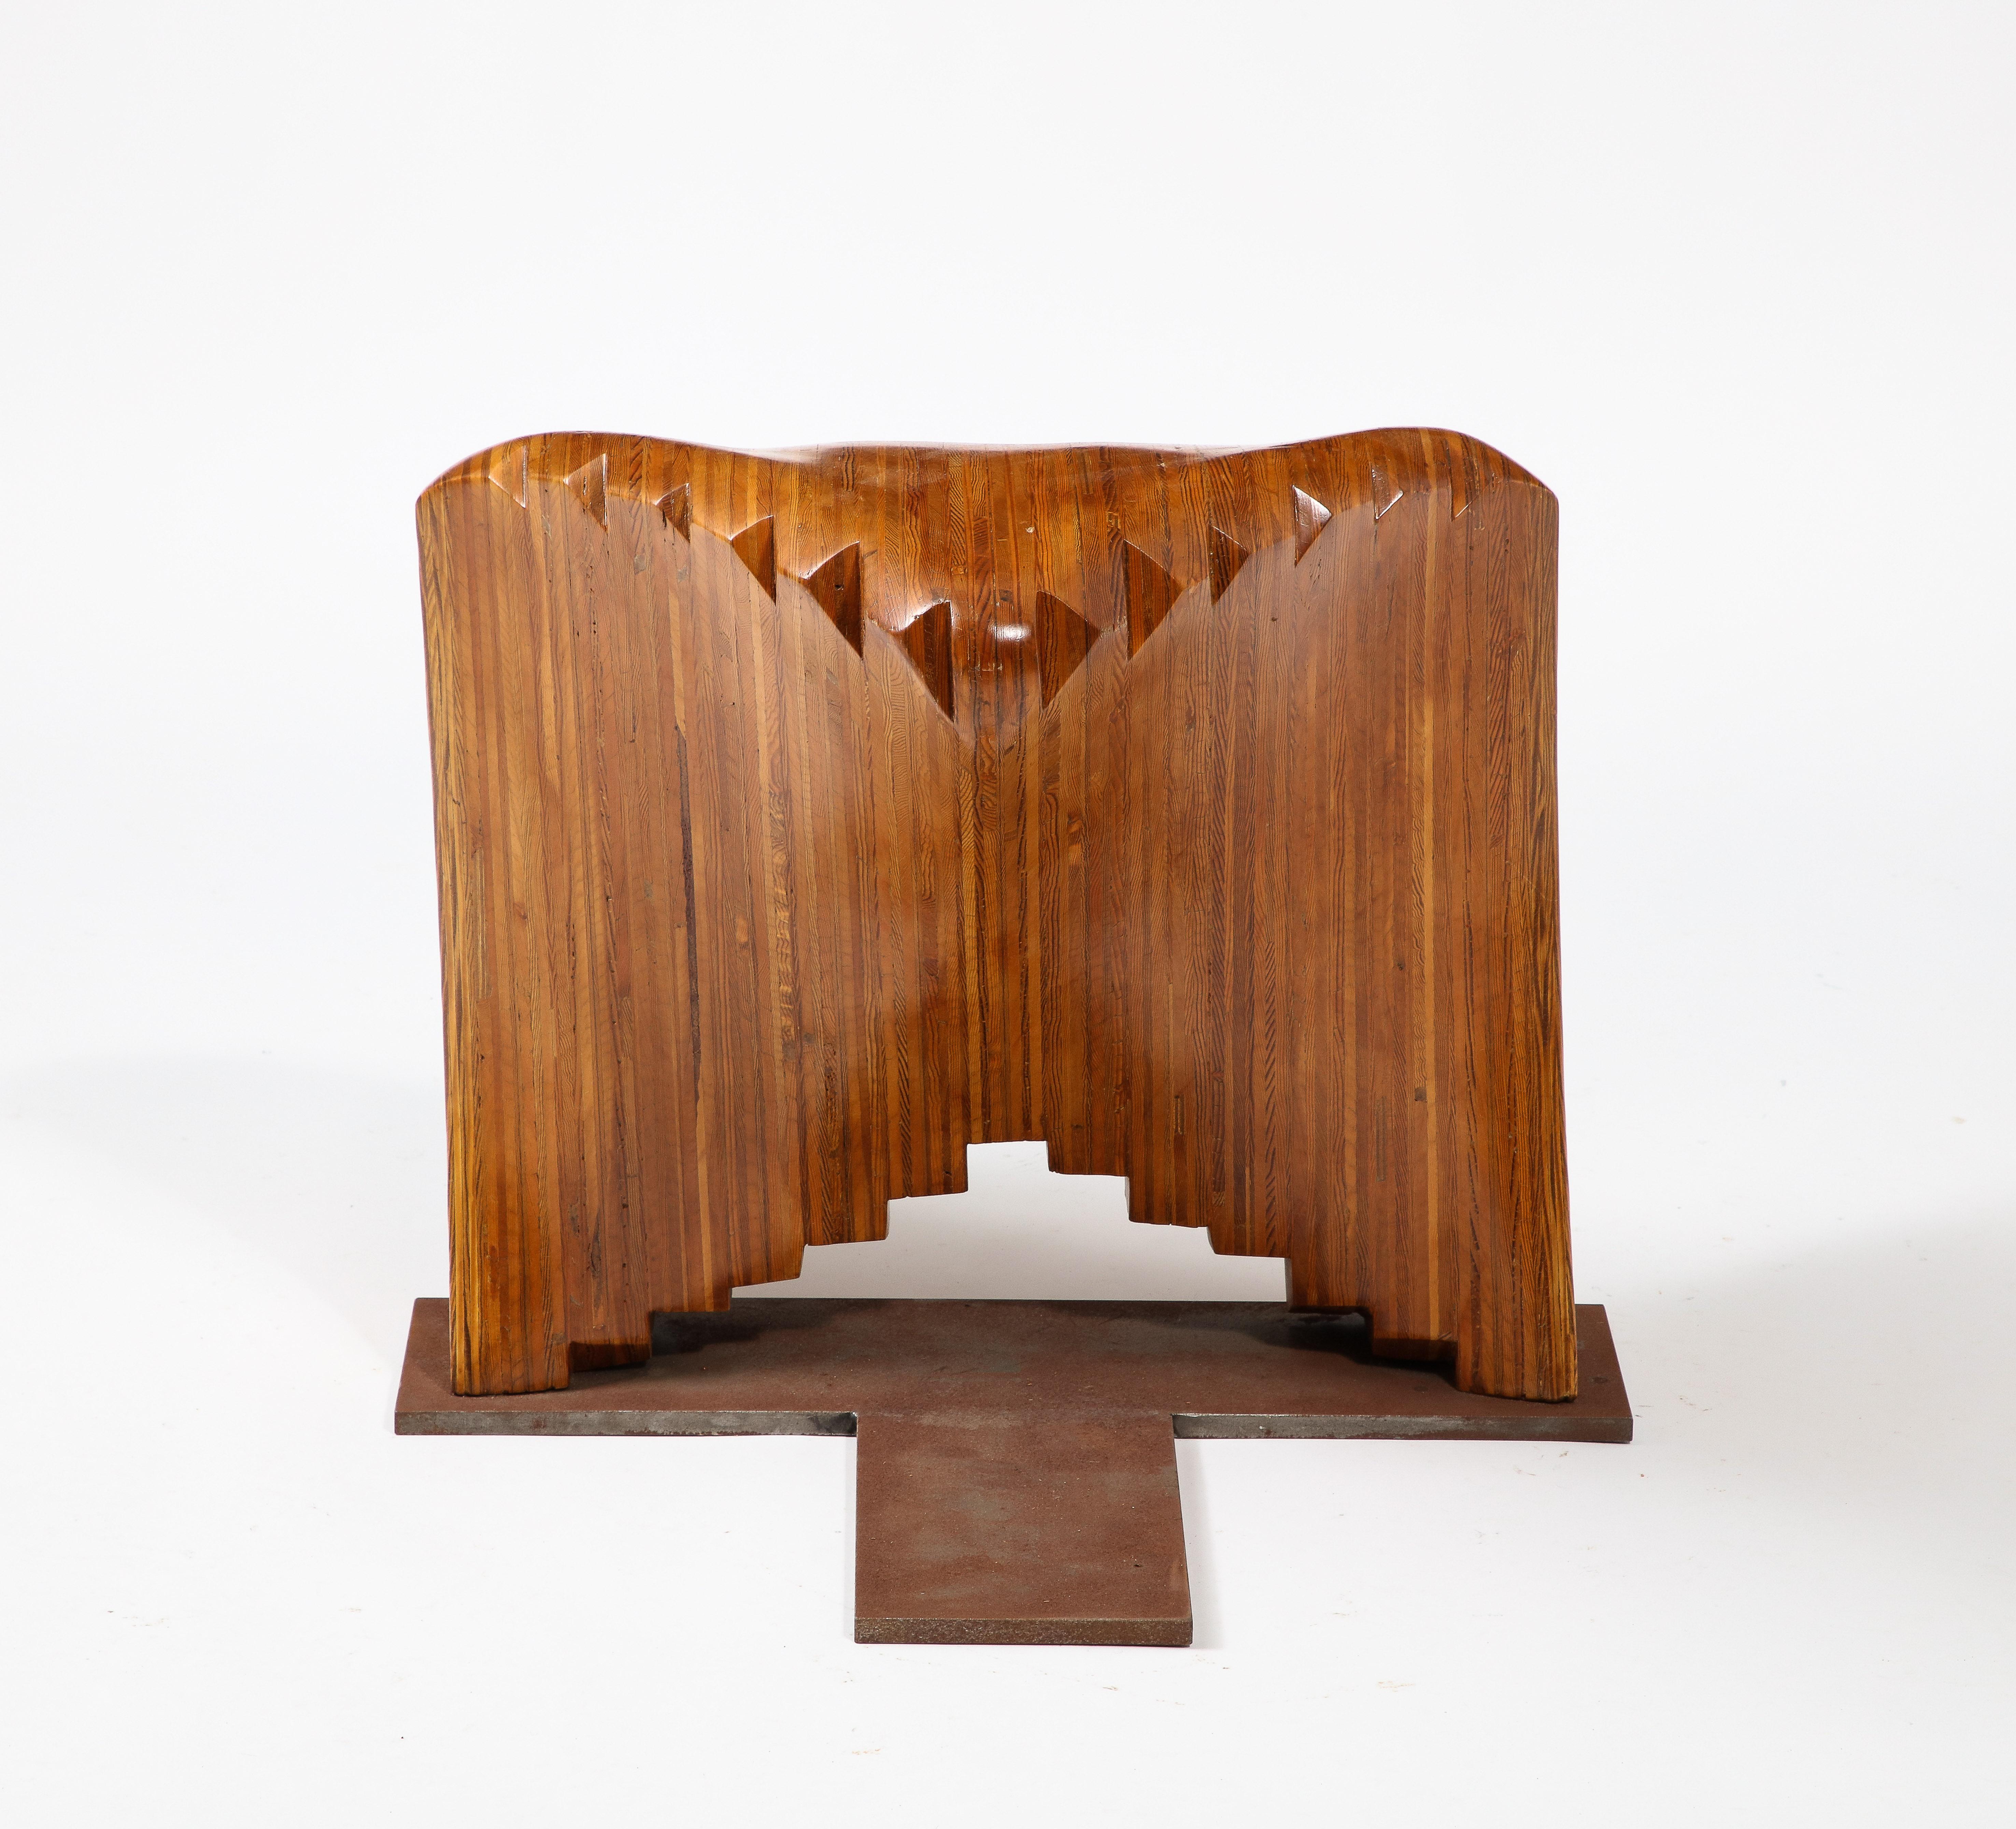 Sculptural Laminated Wood Object or Stool, USA 1960's For Sale 1